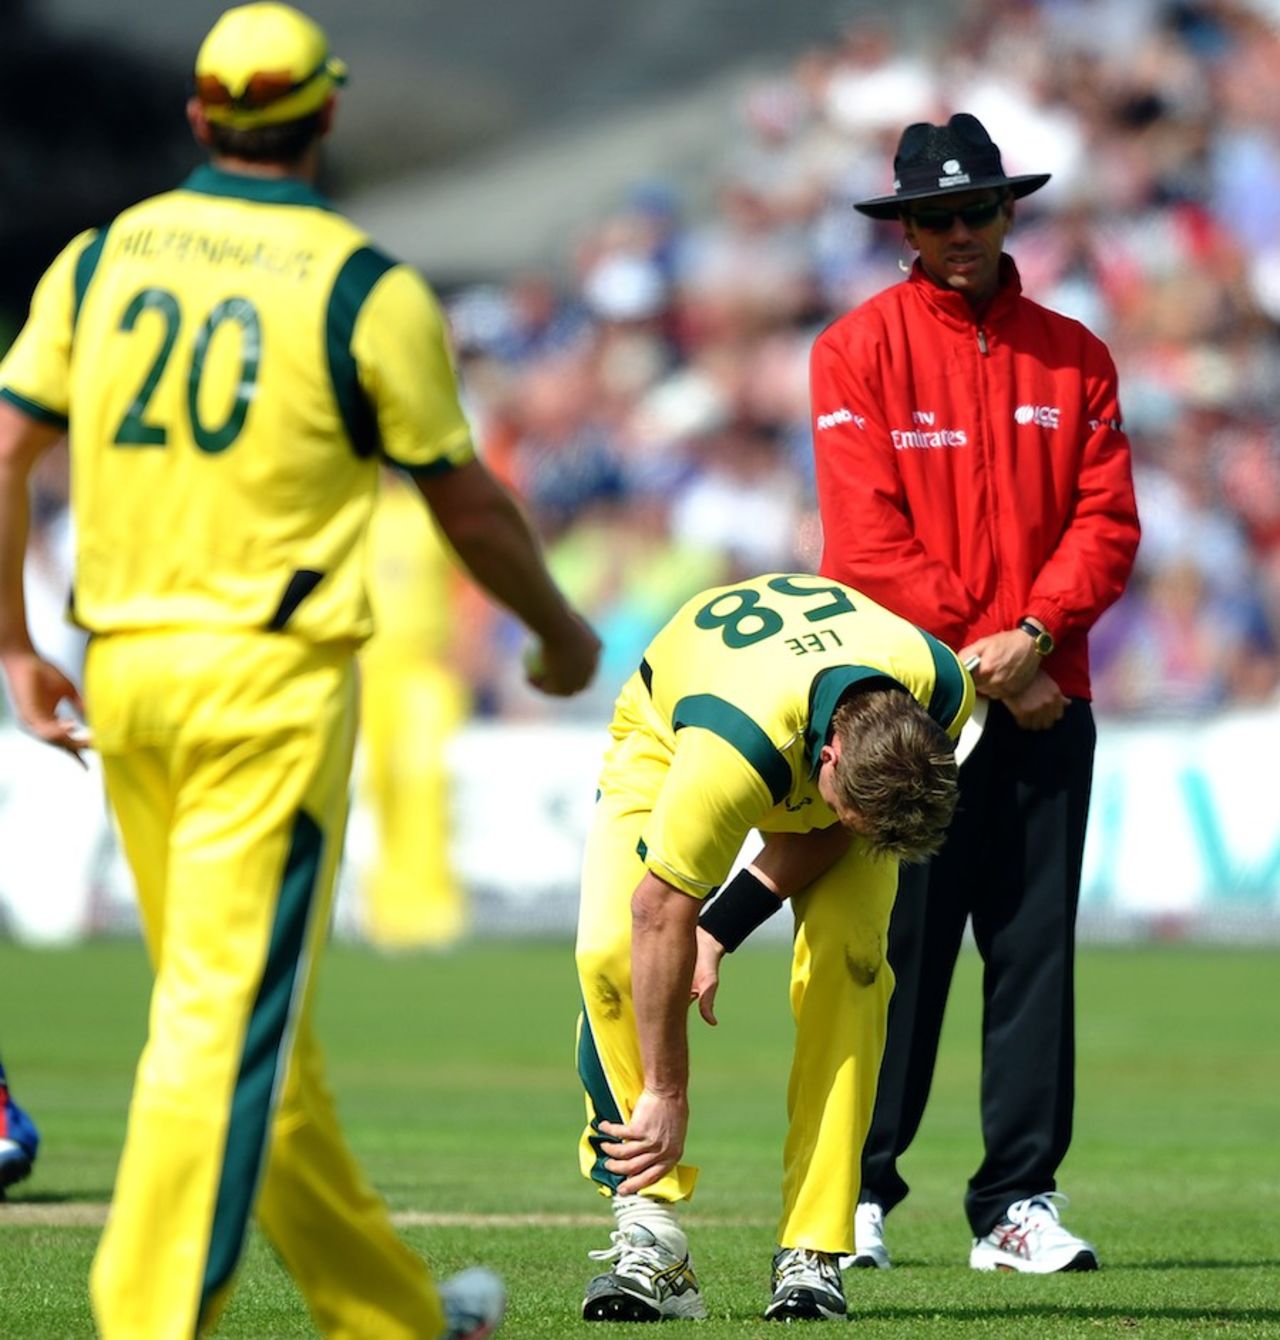 Brett Lee went off the field with a foot problem, England v Australia, 4th ODI, Chester-le-Street, July 7, 2012